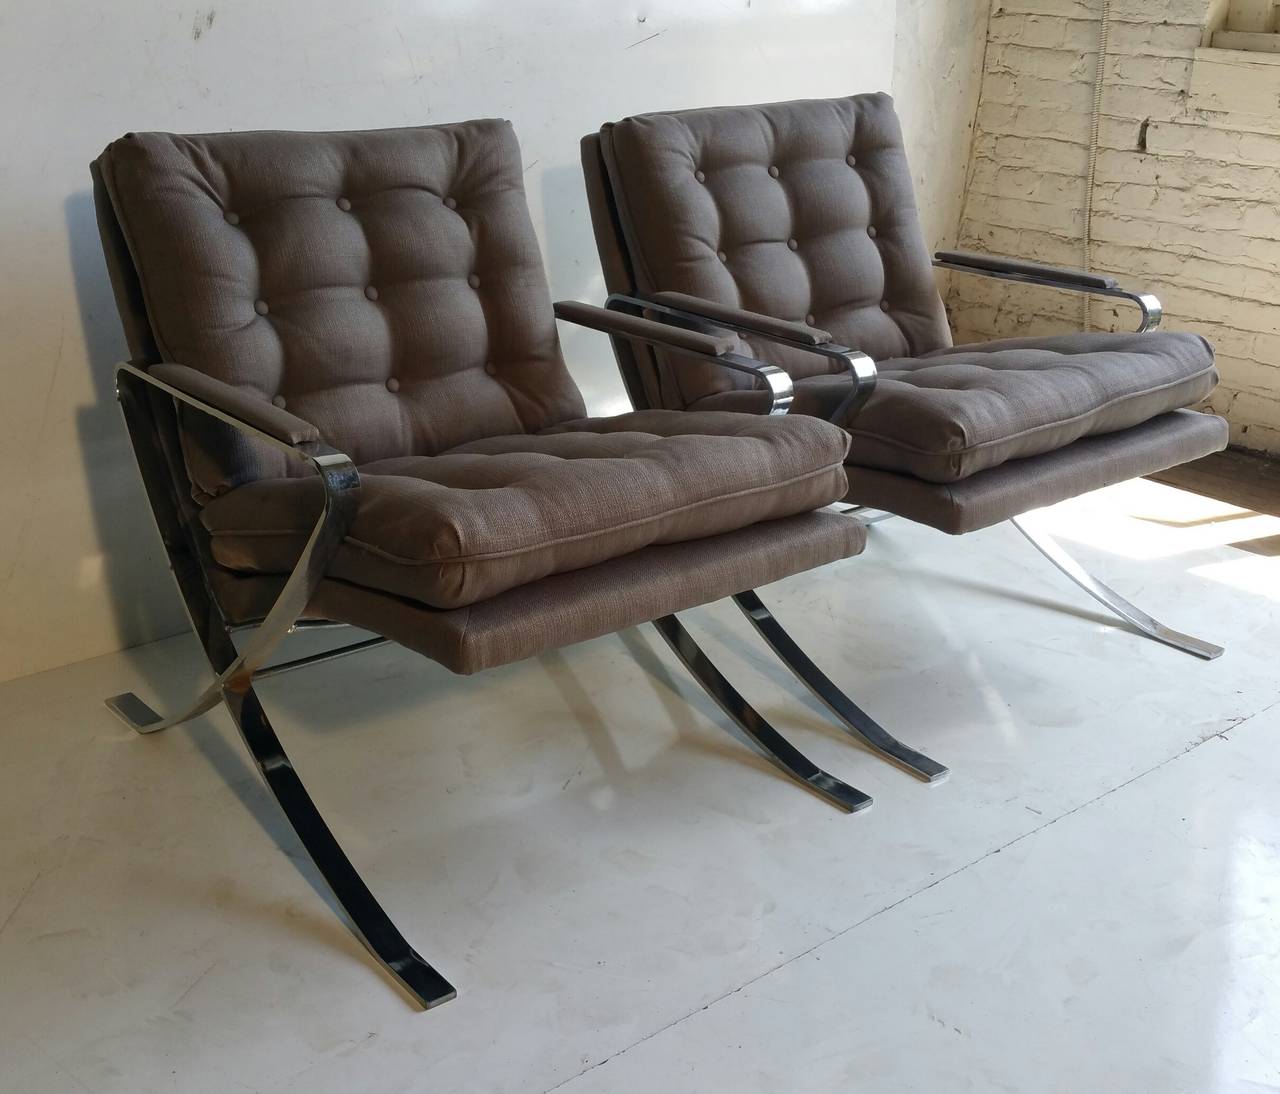 Elegant Bernhardt chrome lounge chair Inspired by the chair designs of Milo Baughman and Mies Van der Rohe's (Barcelona Chair)  
Newly reupholstered,,
The Chrome frame is in nice vintage condition.

Chairs were made by the Flair Division of the